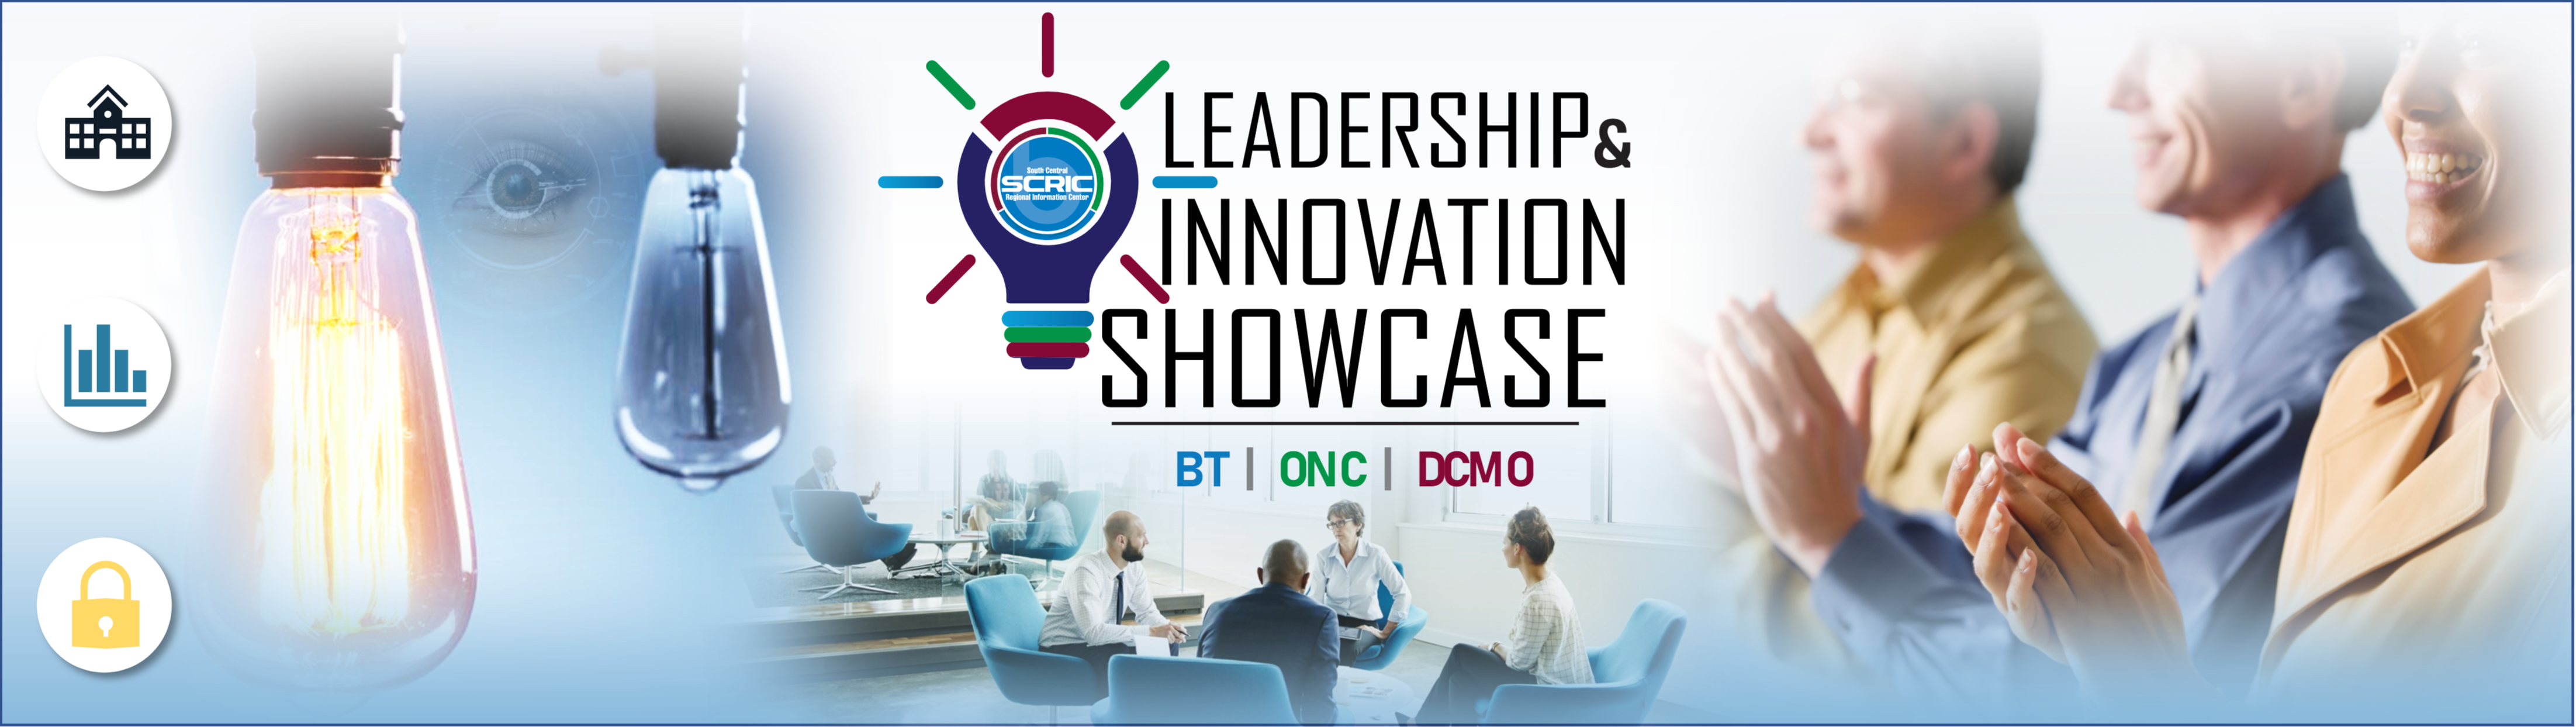 Image of people clapping,  light bulbs in the background and images of people sitting in chairs collaborating.  Three icons representing data, security, and district and the image title displays, Leadership and Innovation Showcase BT/ONC/DCMO